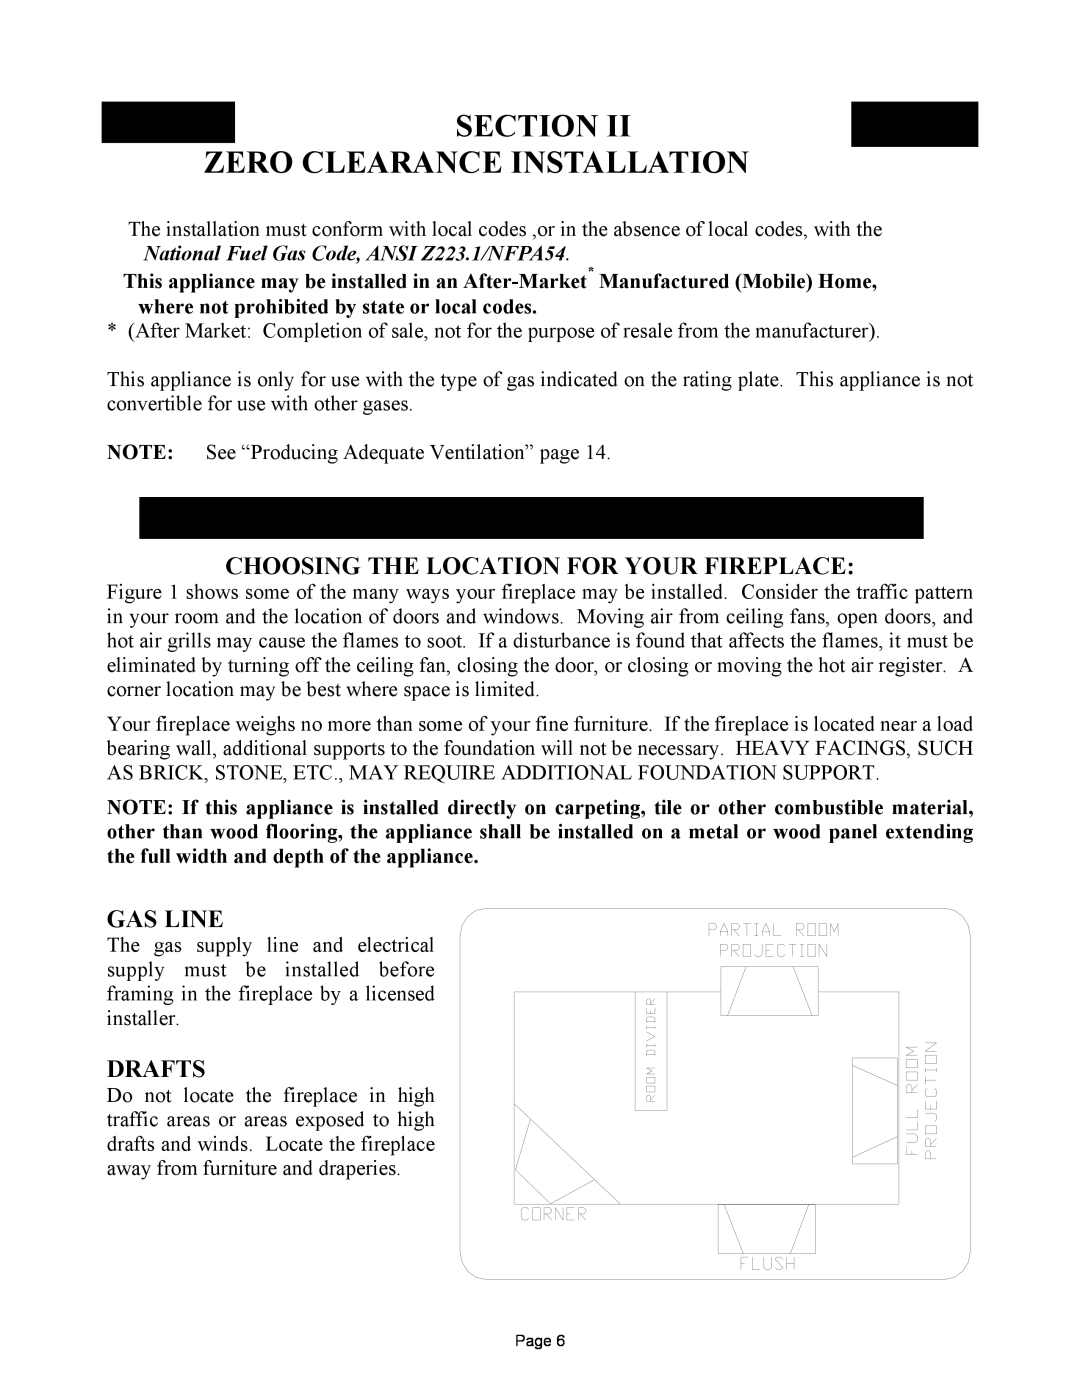 New Buck Corporation MODEL FP-327-ZC Section Zero Clearance Installation, Choosing The Location For Your Fireplace, Drafts 